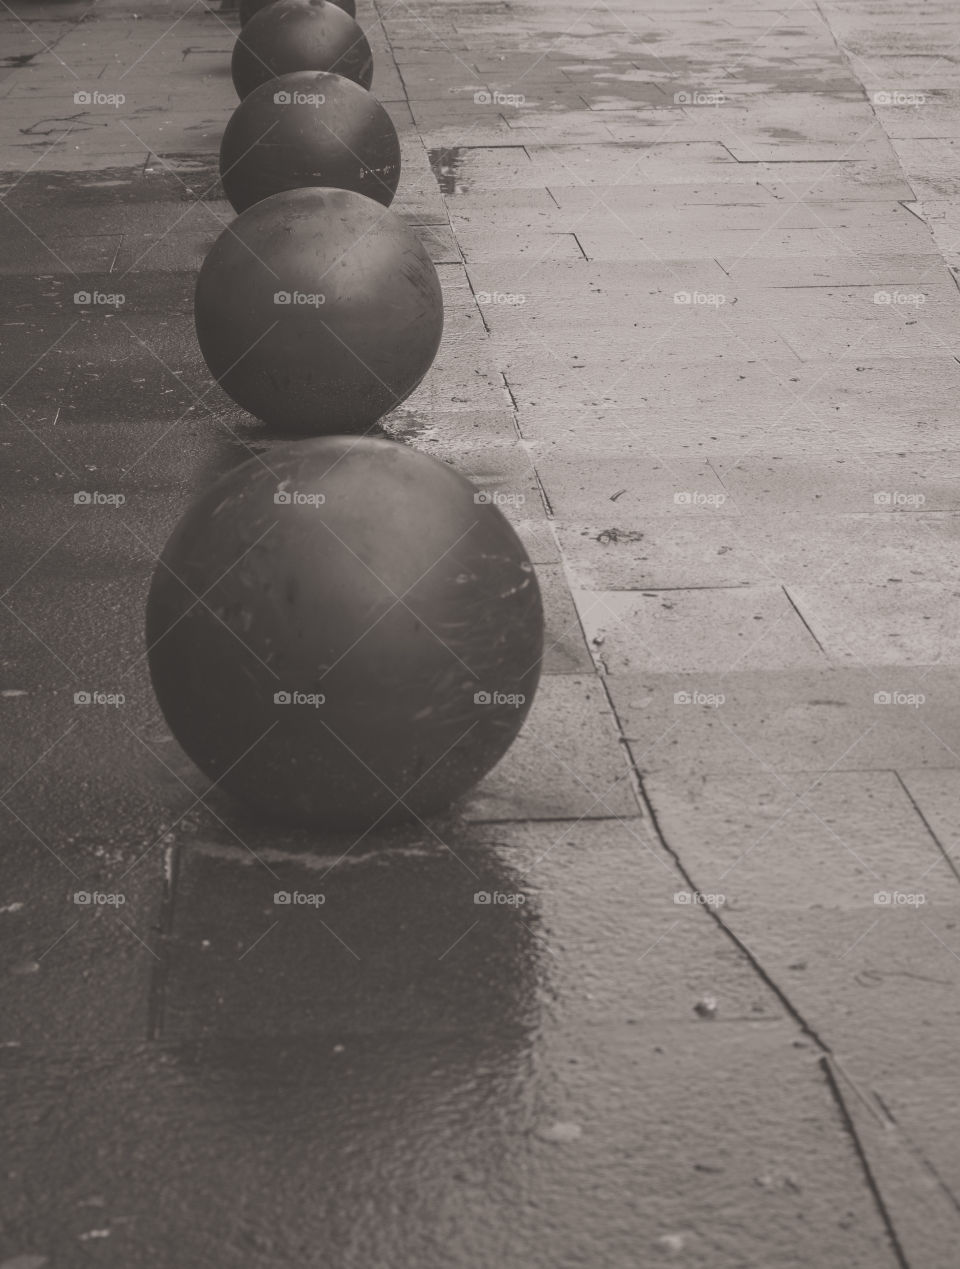 Decorative balls on the sidewalk on a rainy day of spring